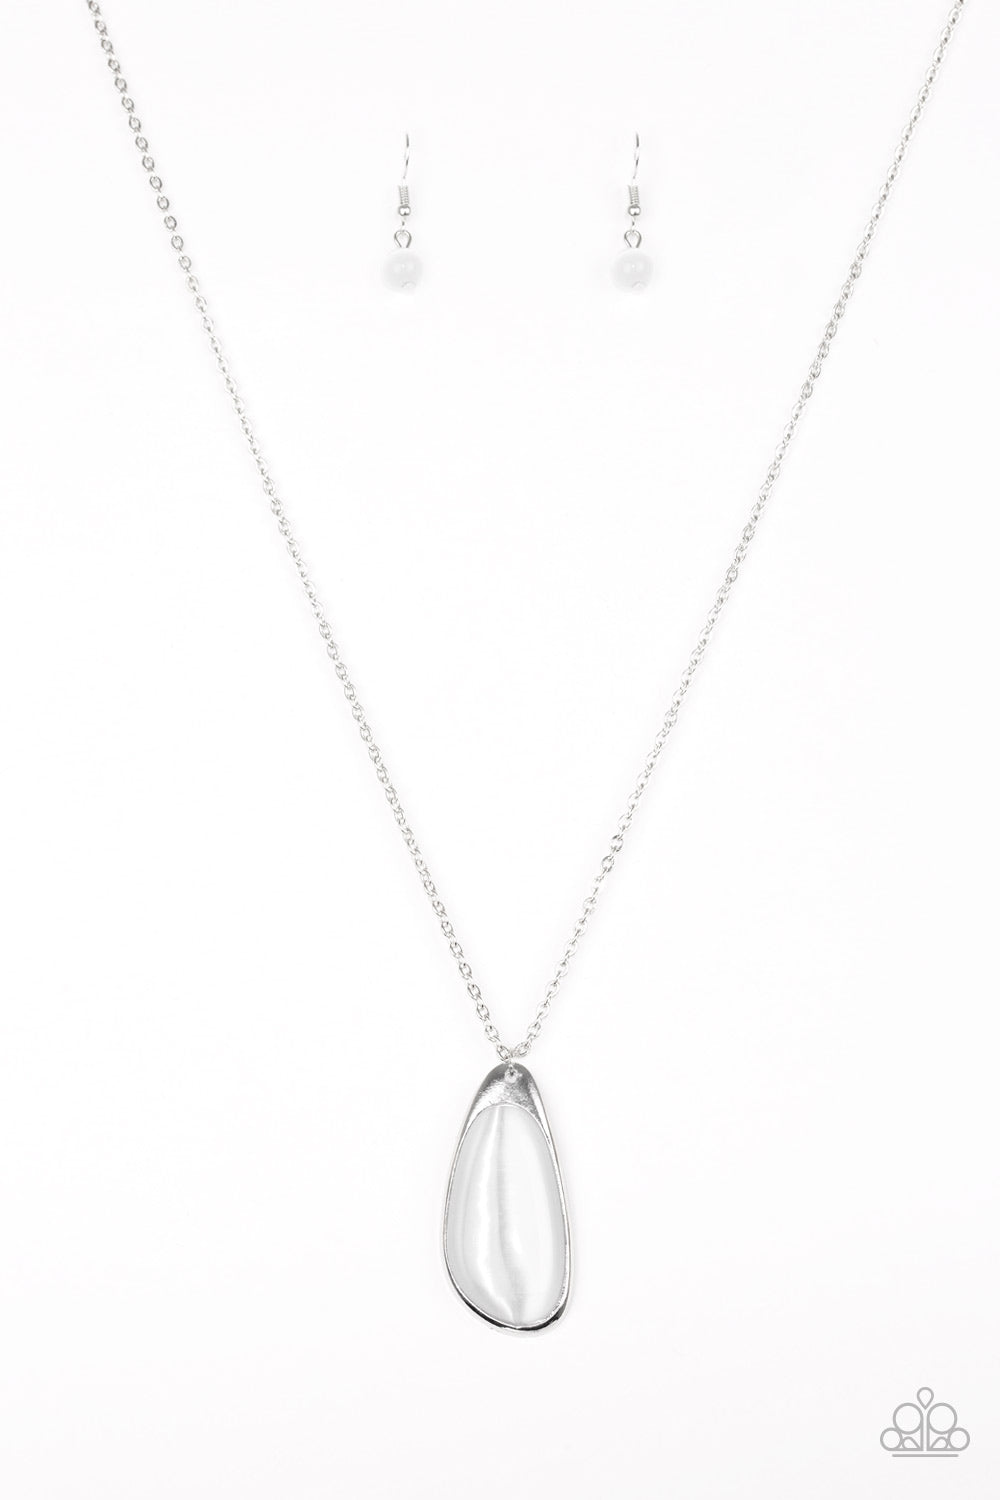 Magically Modern - White moonstone necklace